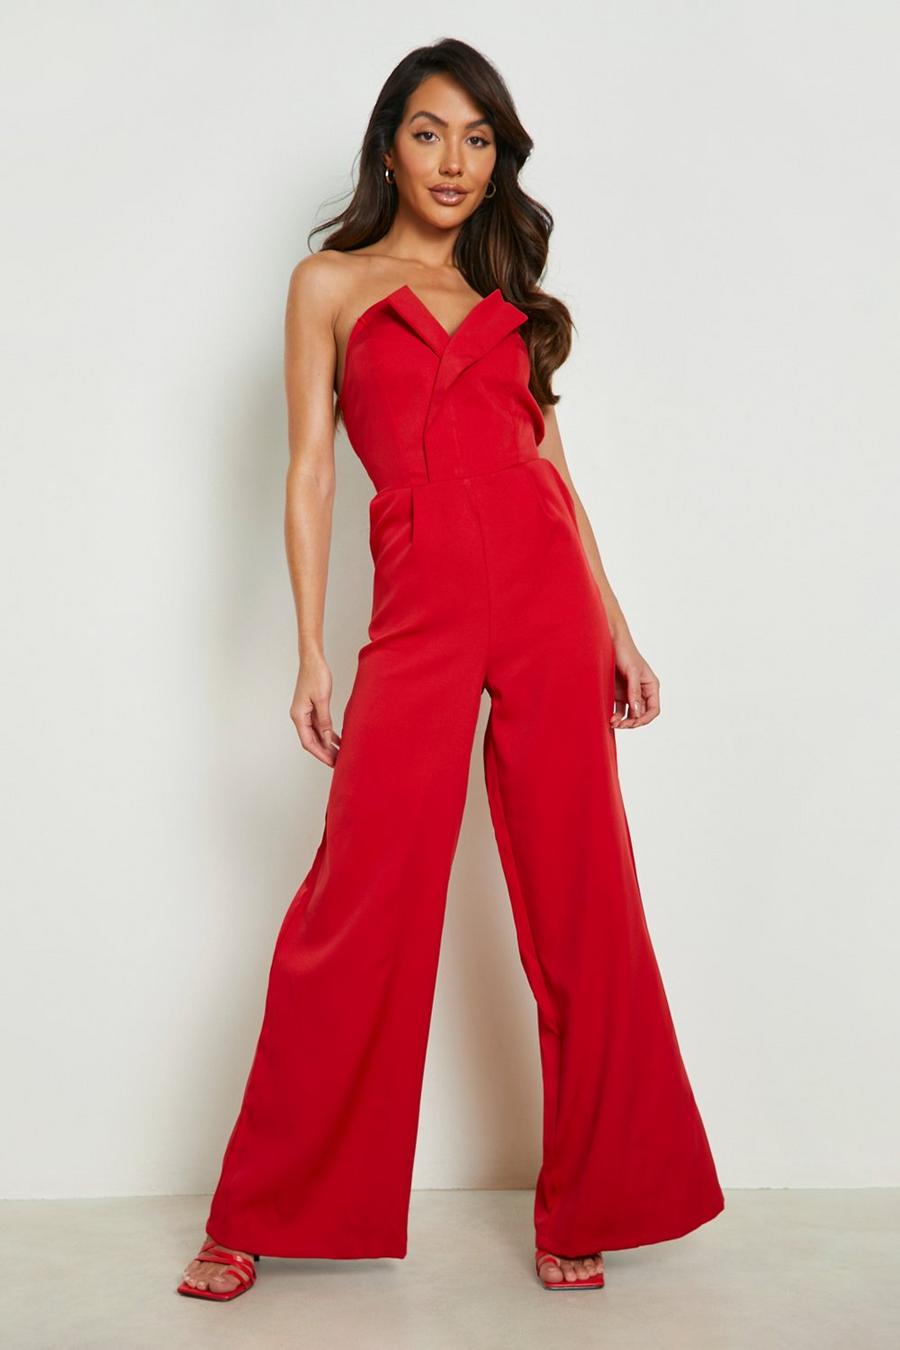 Red Jumpsuit Women Formal Prom Jumpsuit Holiday Party Outfit 